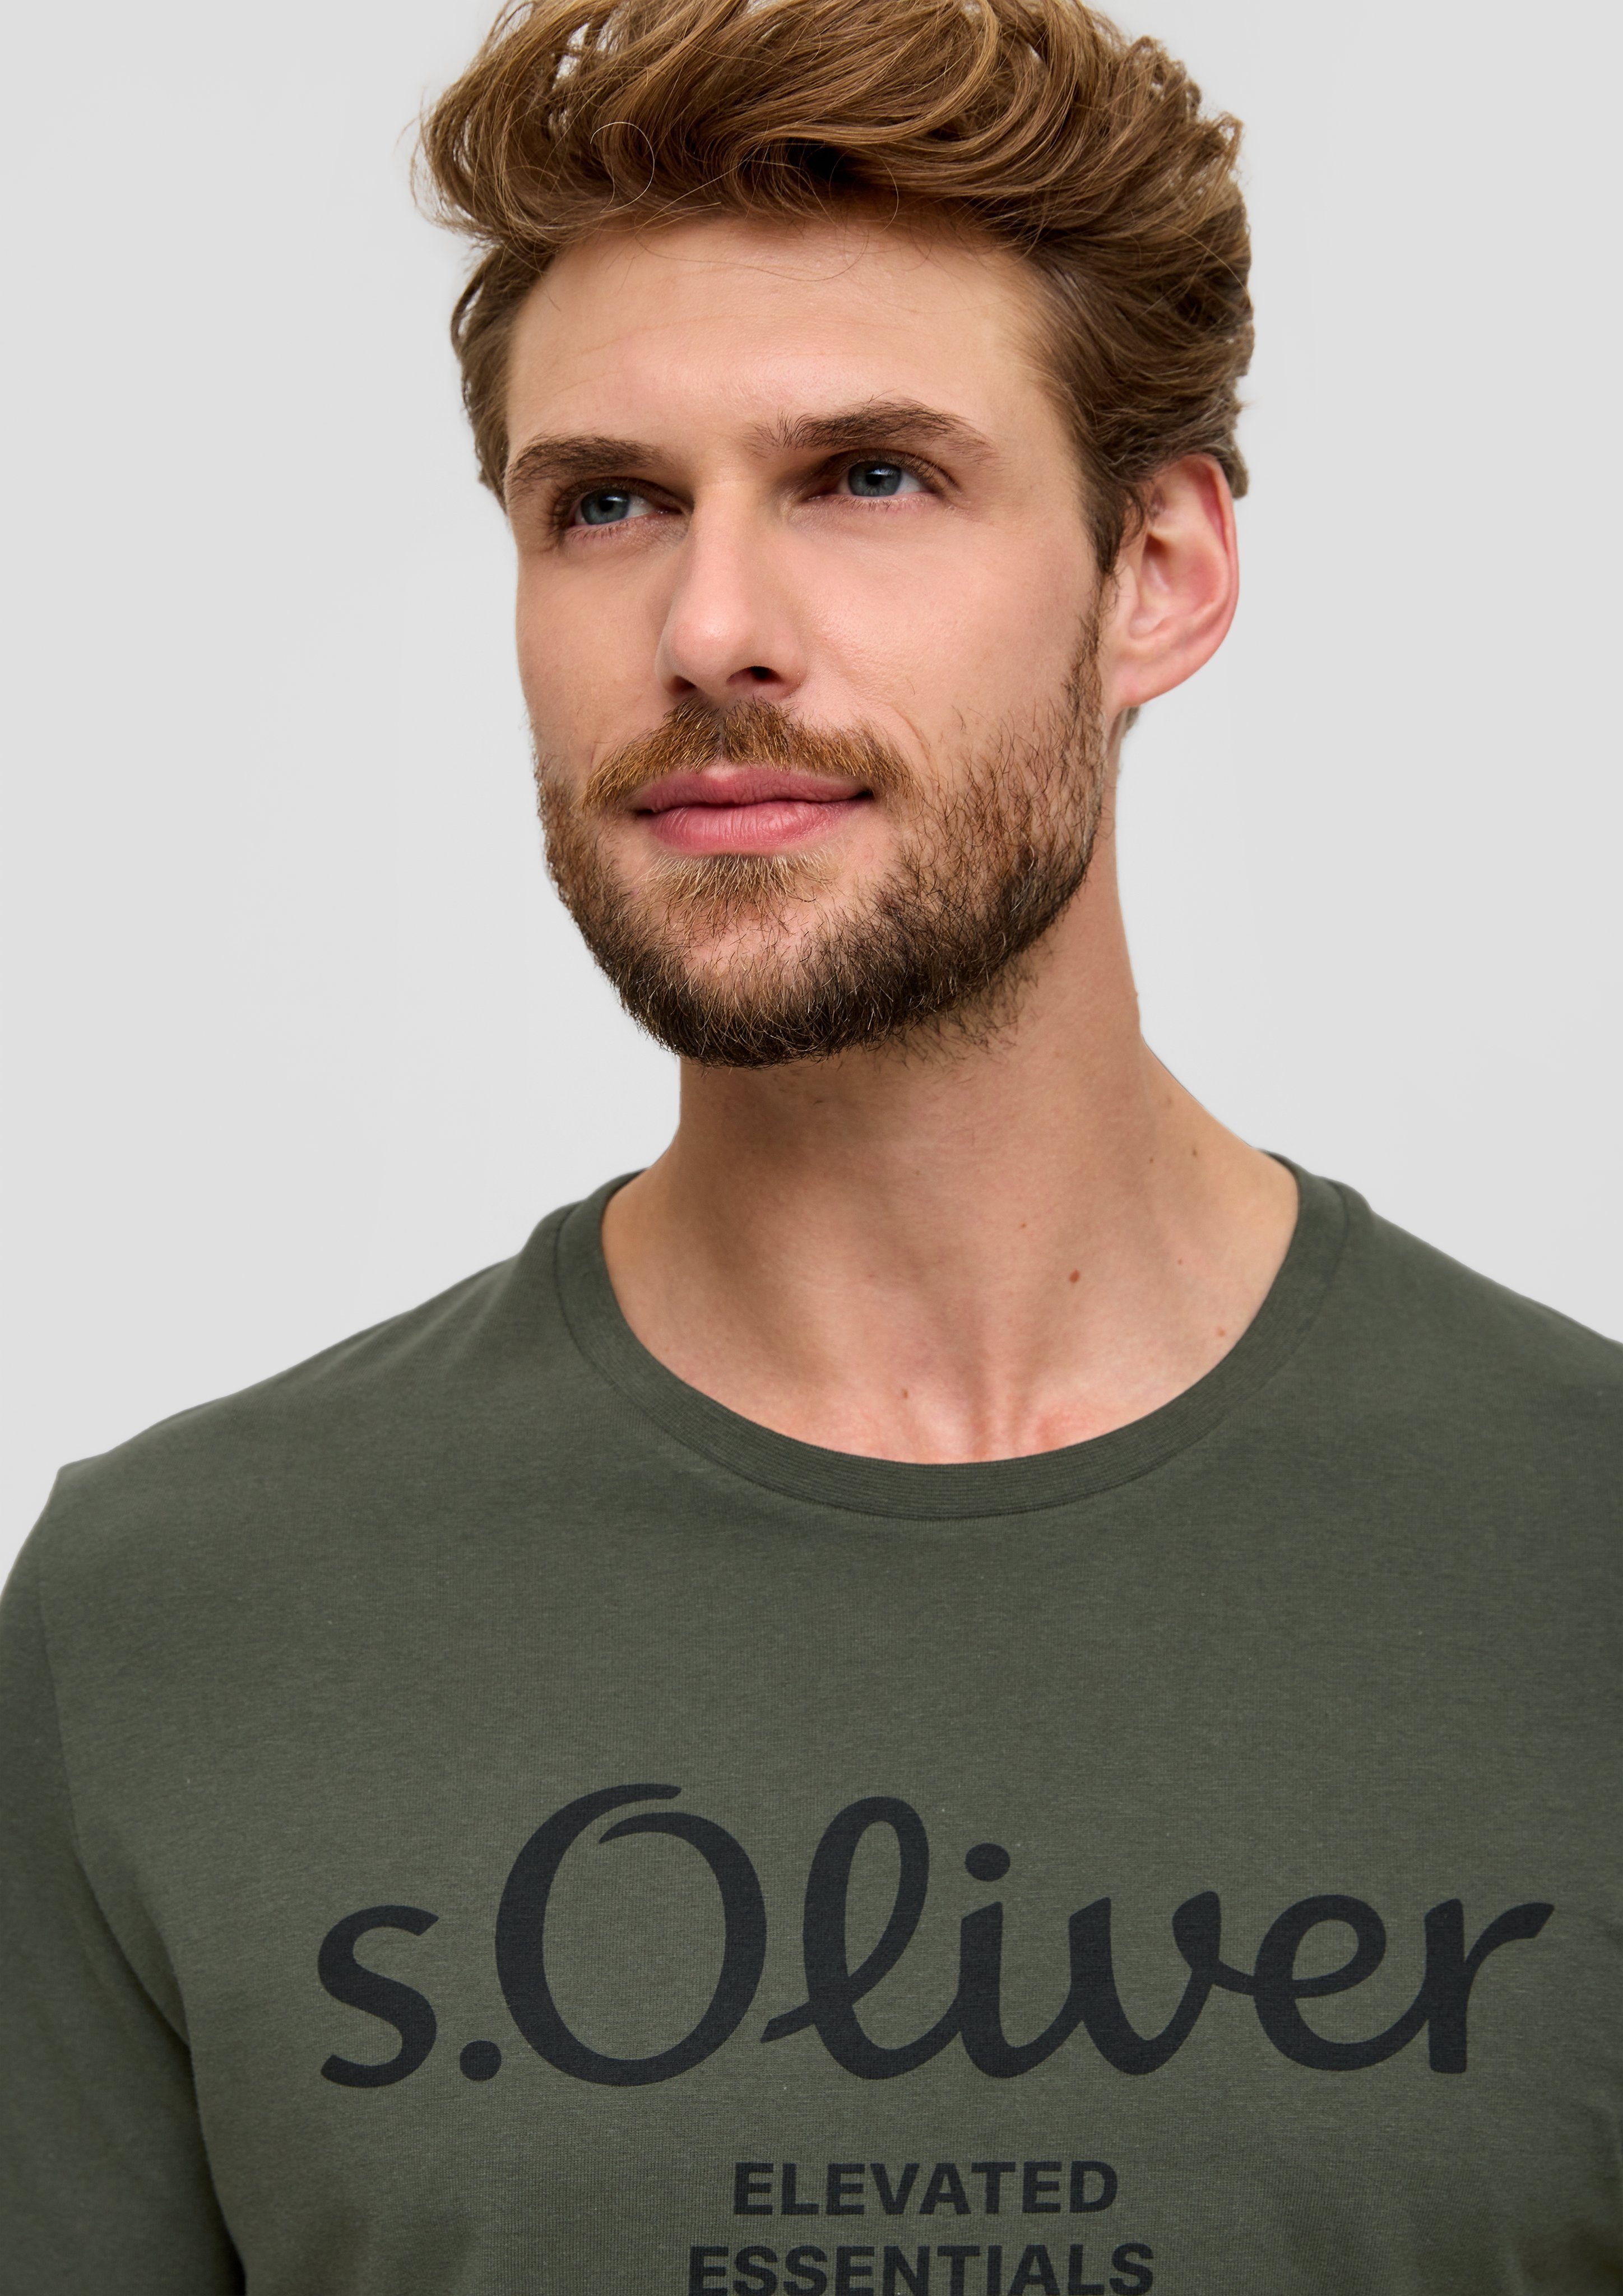 im T-Shirt green Look sportiven s.Oliver